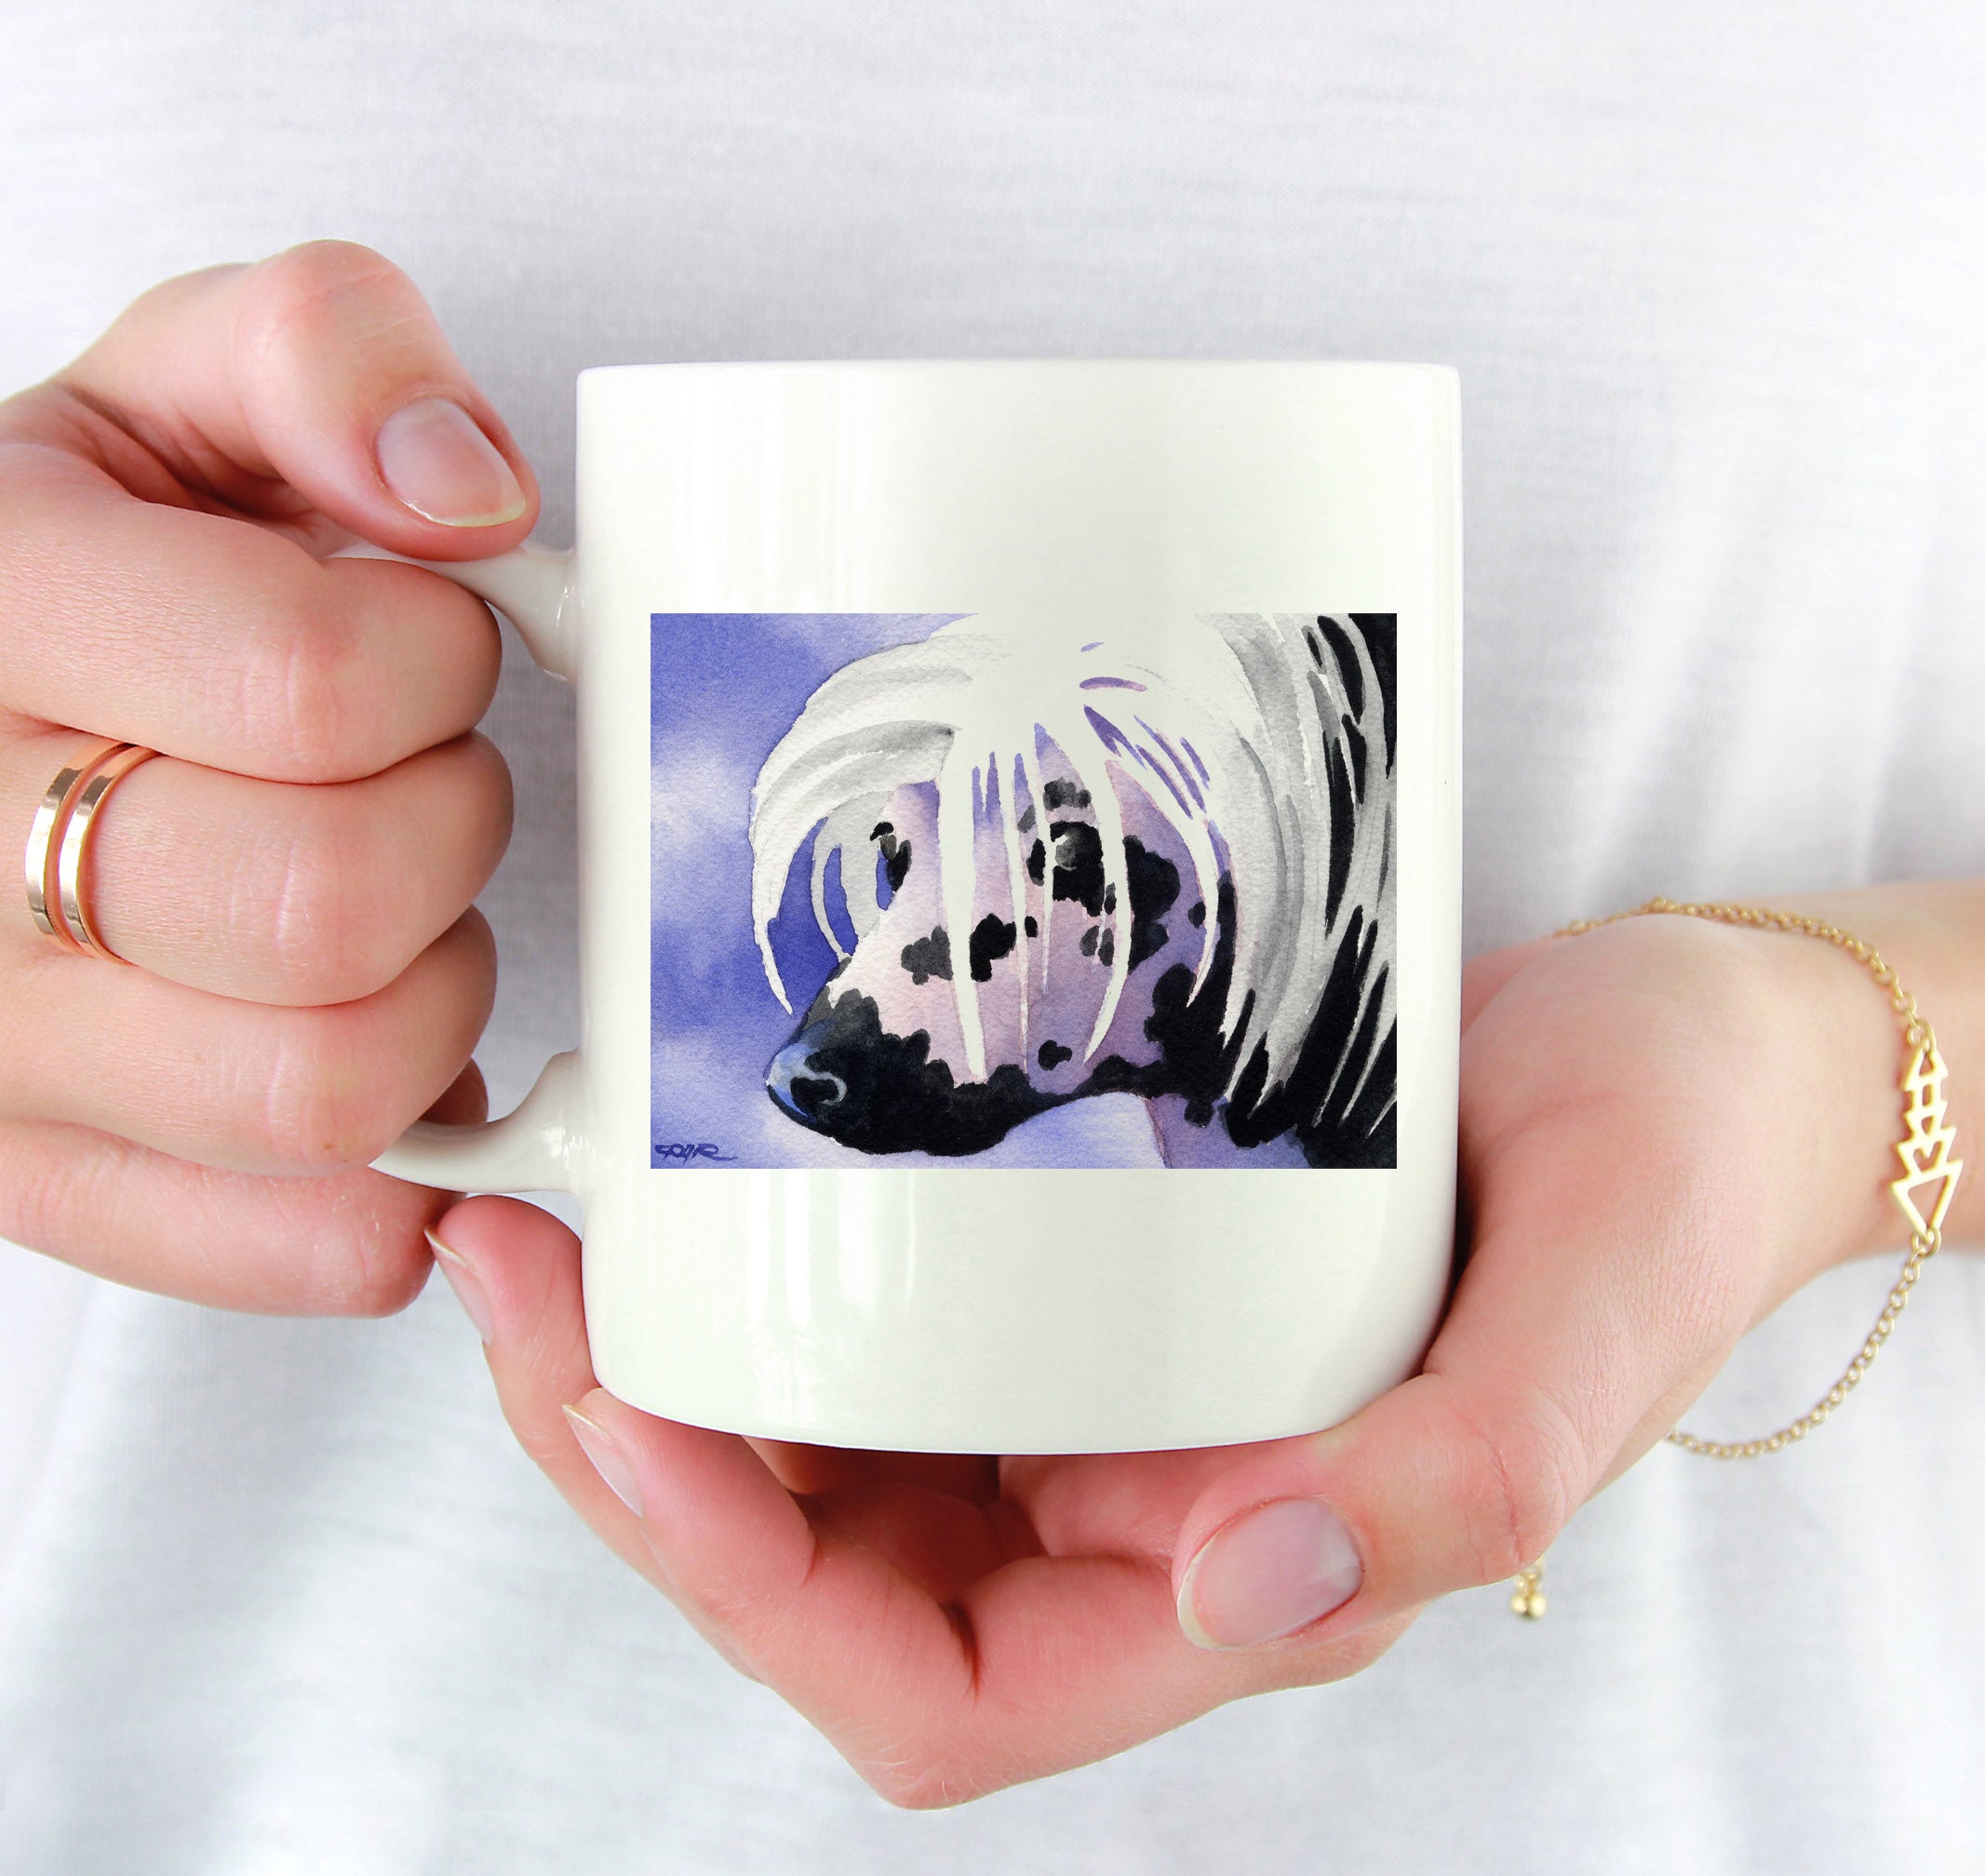 Chinese Crested Watercolor Mug Art by Artist DJ Rogers